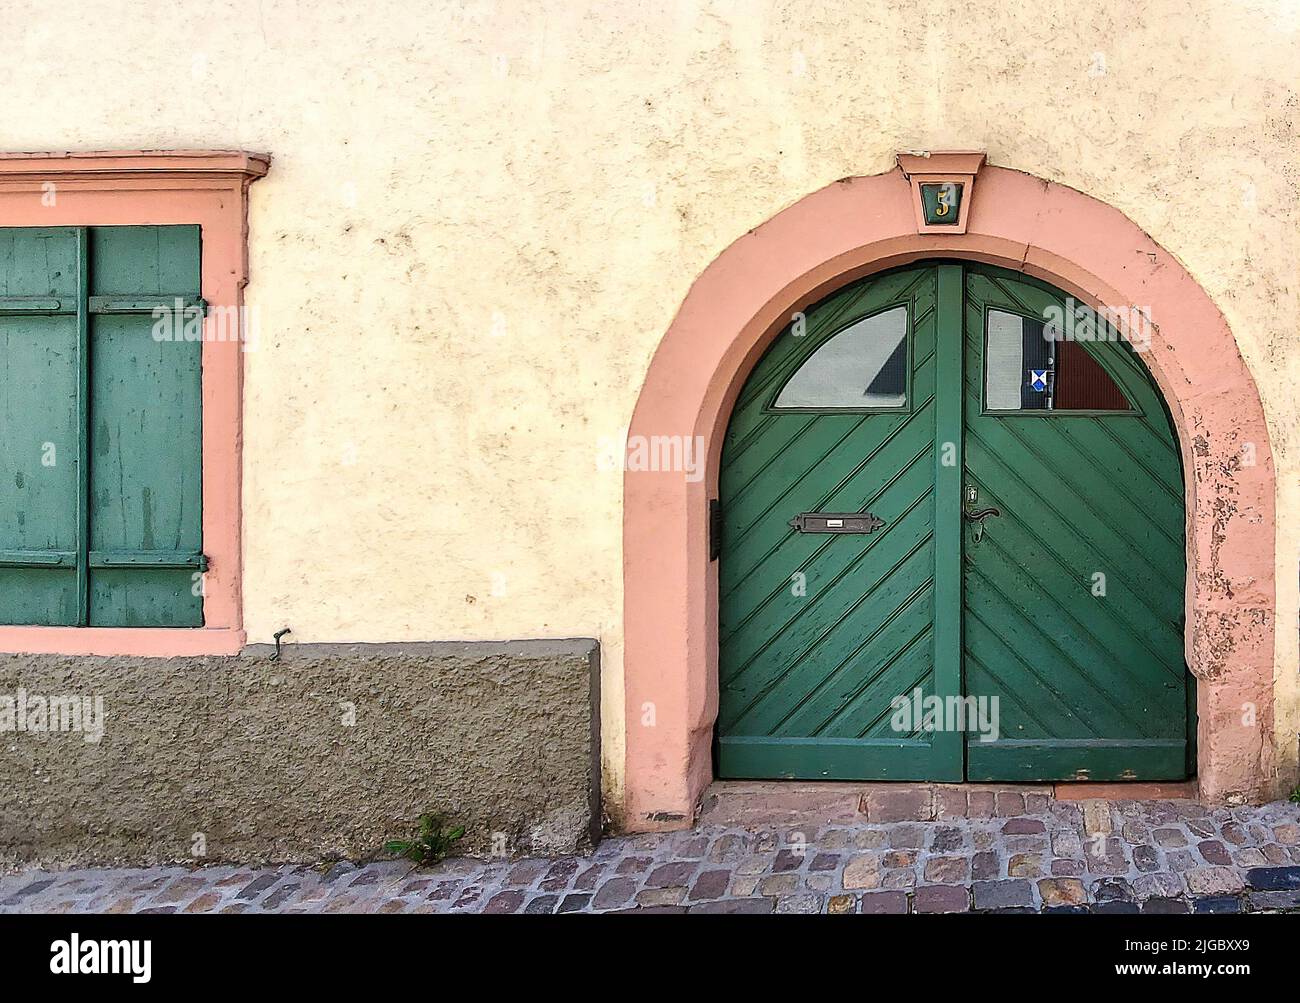 Old European arched green door with windows on a brick street Stock Photo